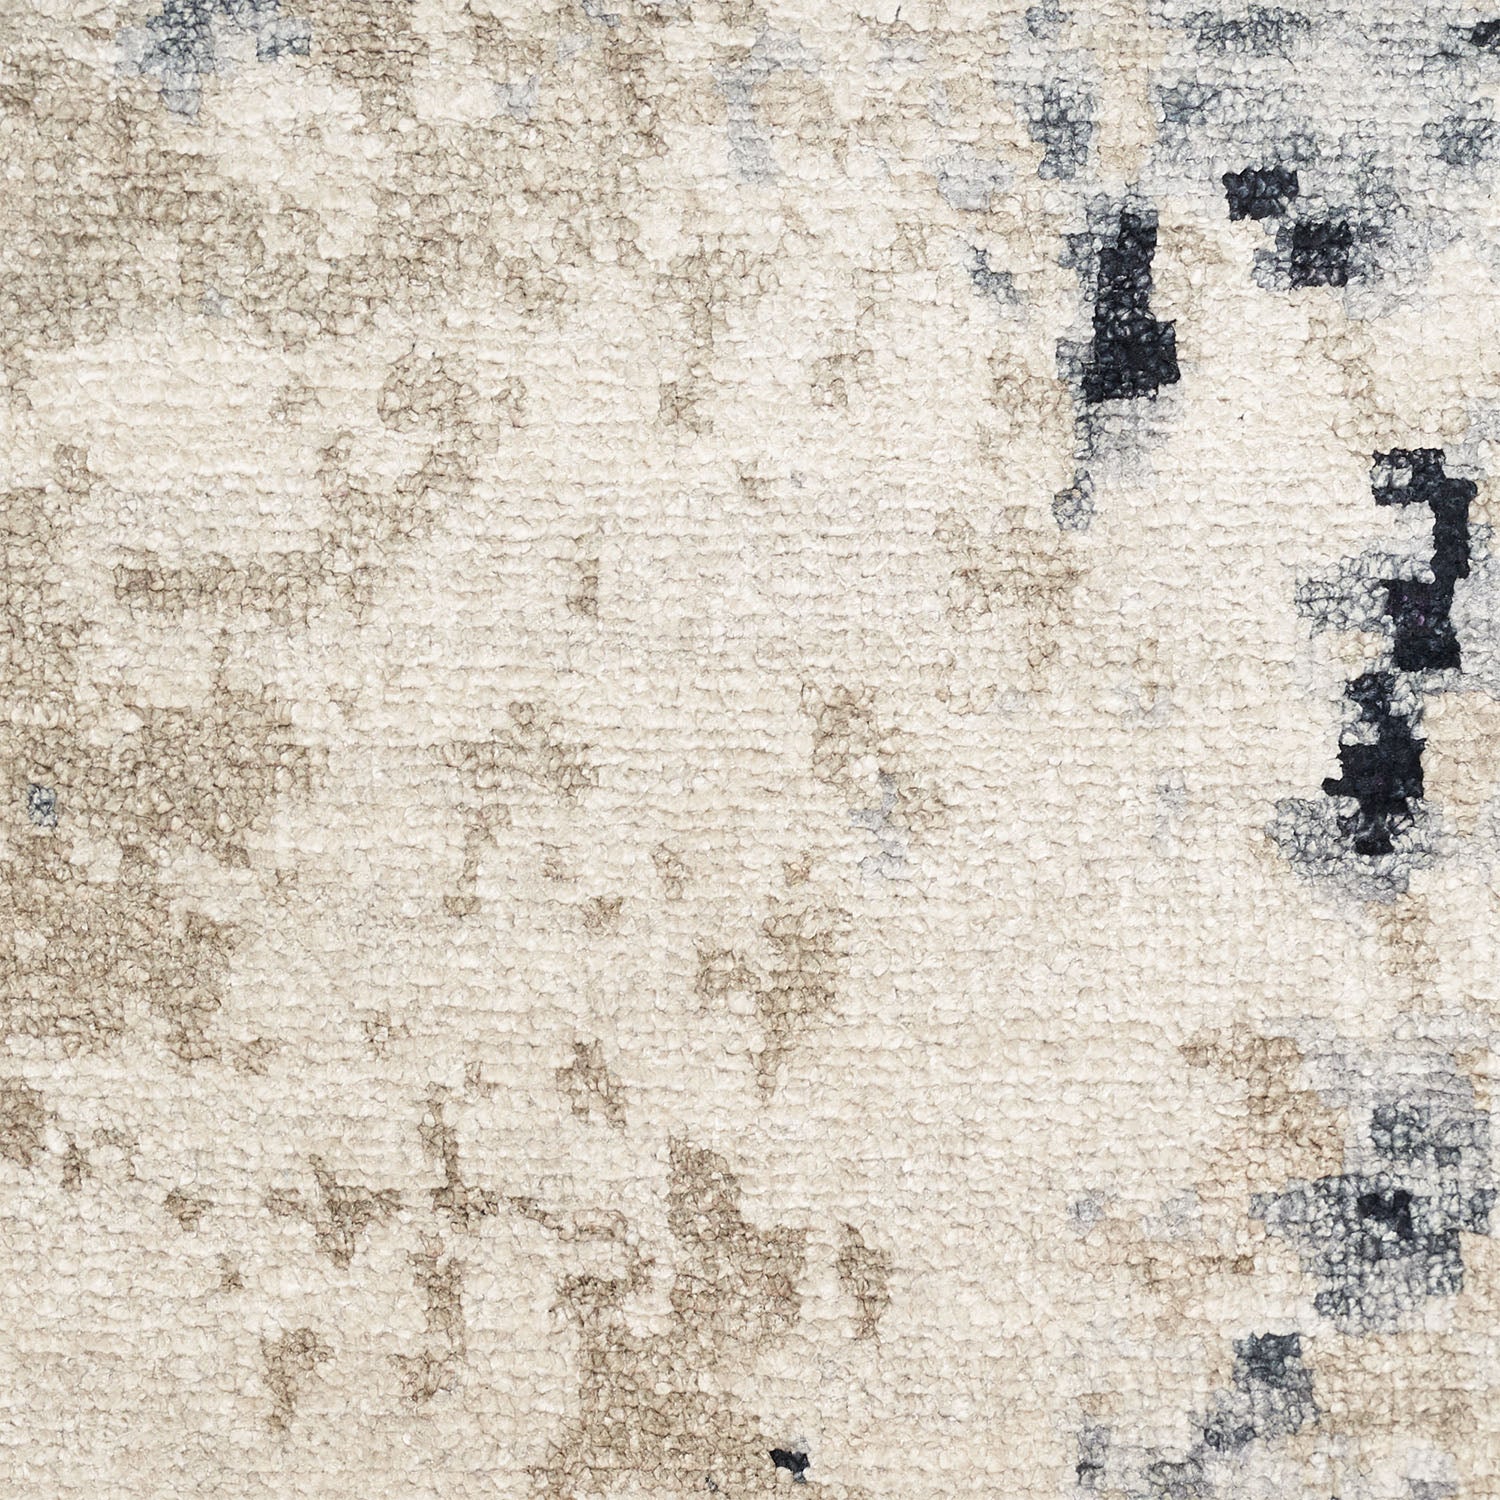 Close-up view of a textured beige rug with abstract dark spots.